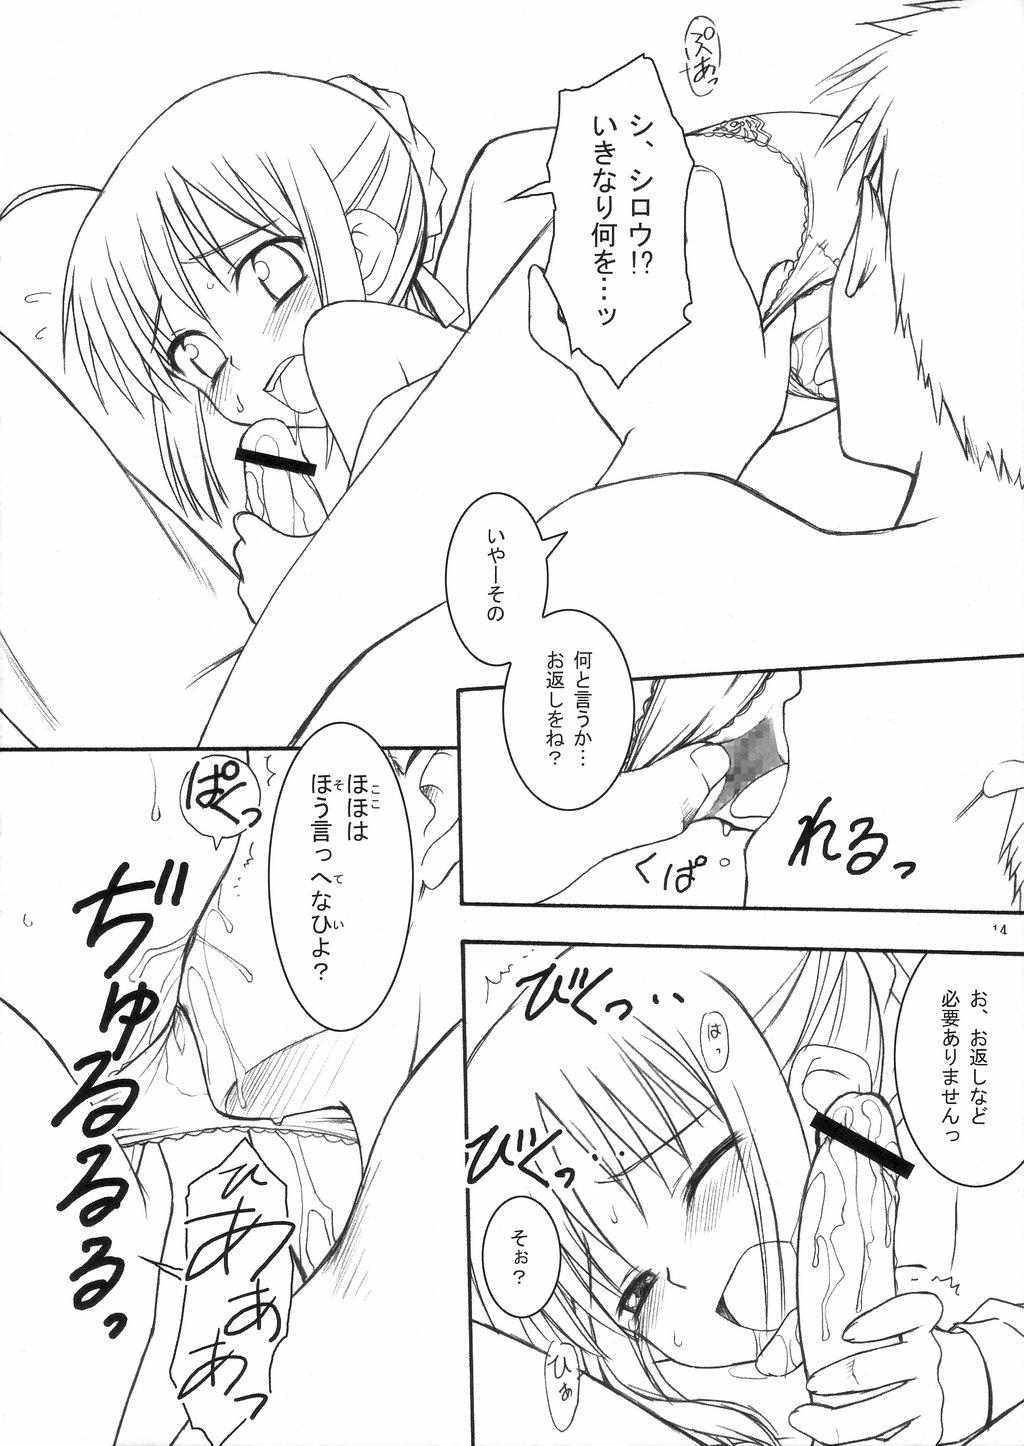 Culo My Twilight - Fate stay night Soapy Massage - Page 13